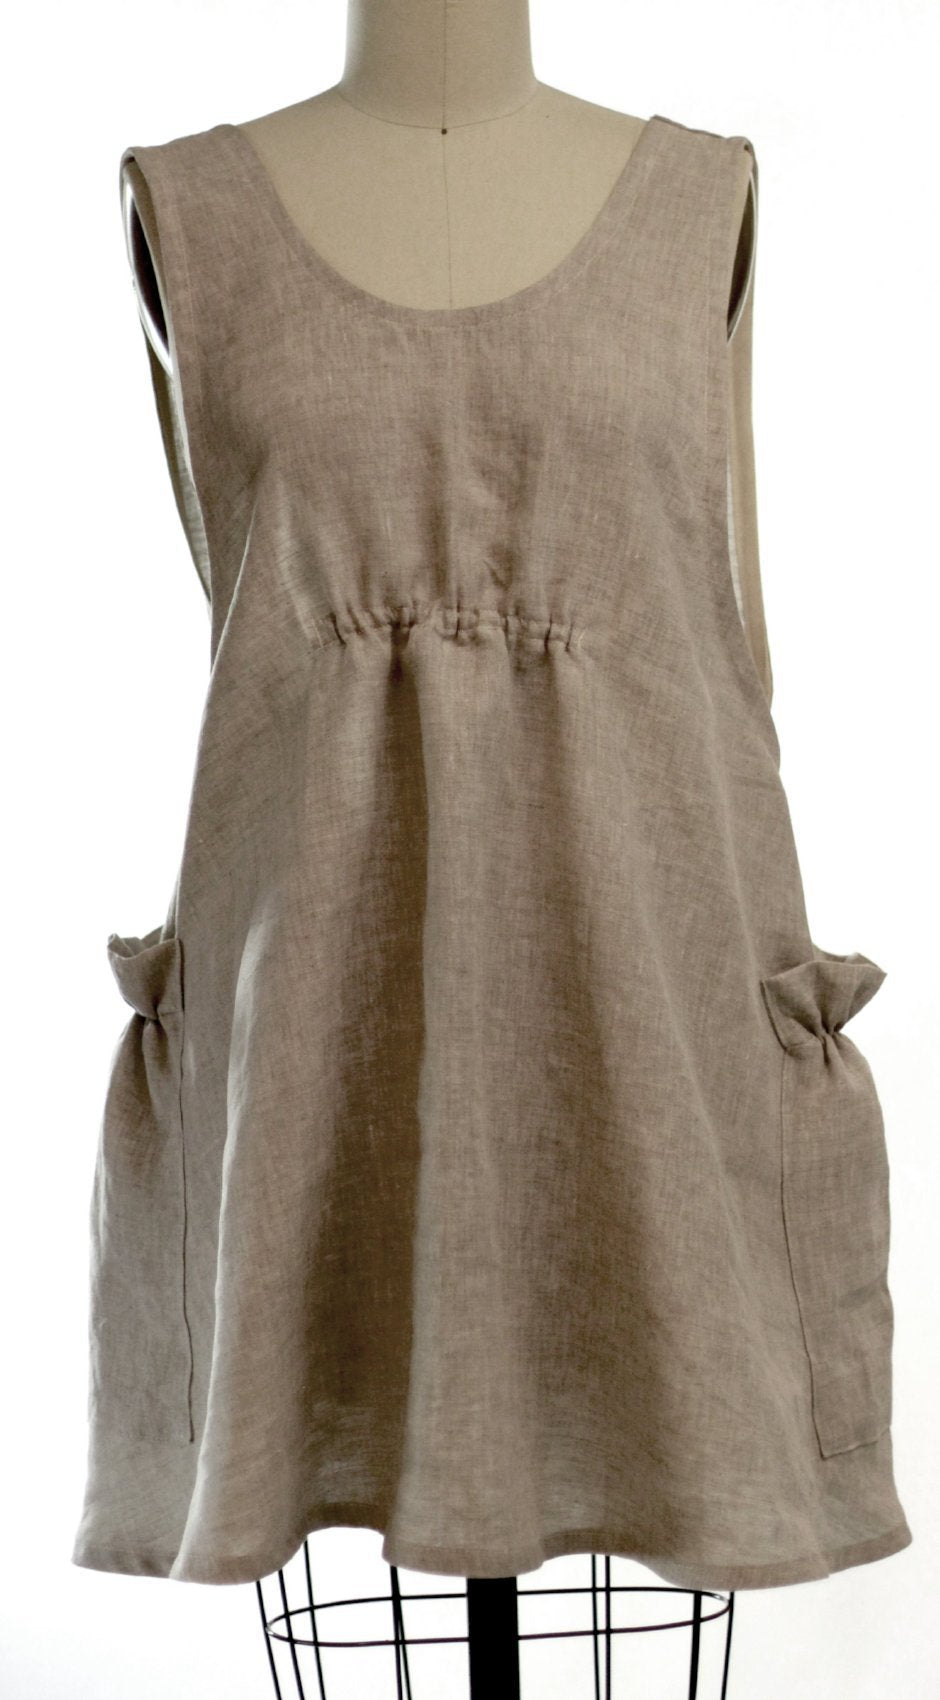 XS-5X Smock #1 in 100% Flax Linen